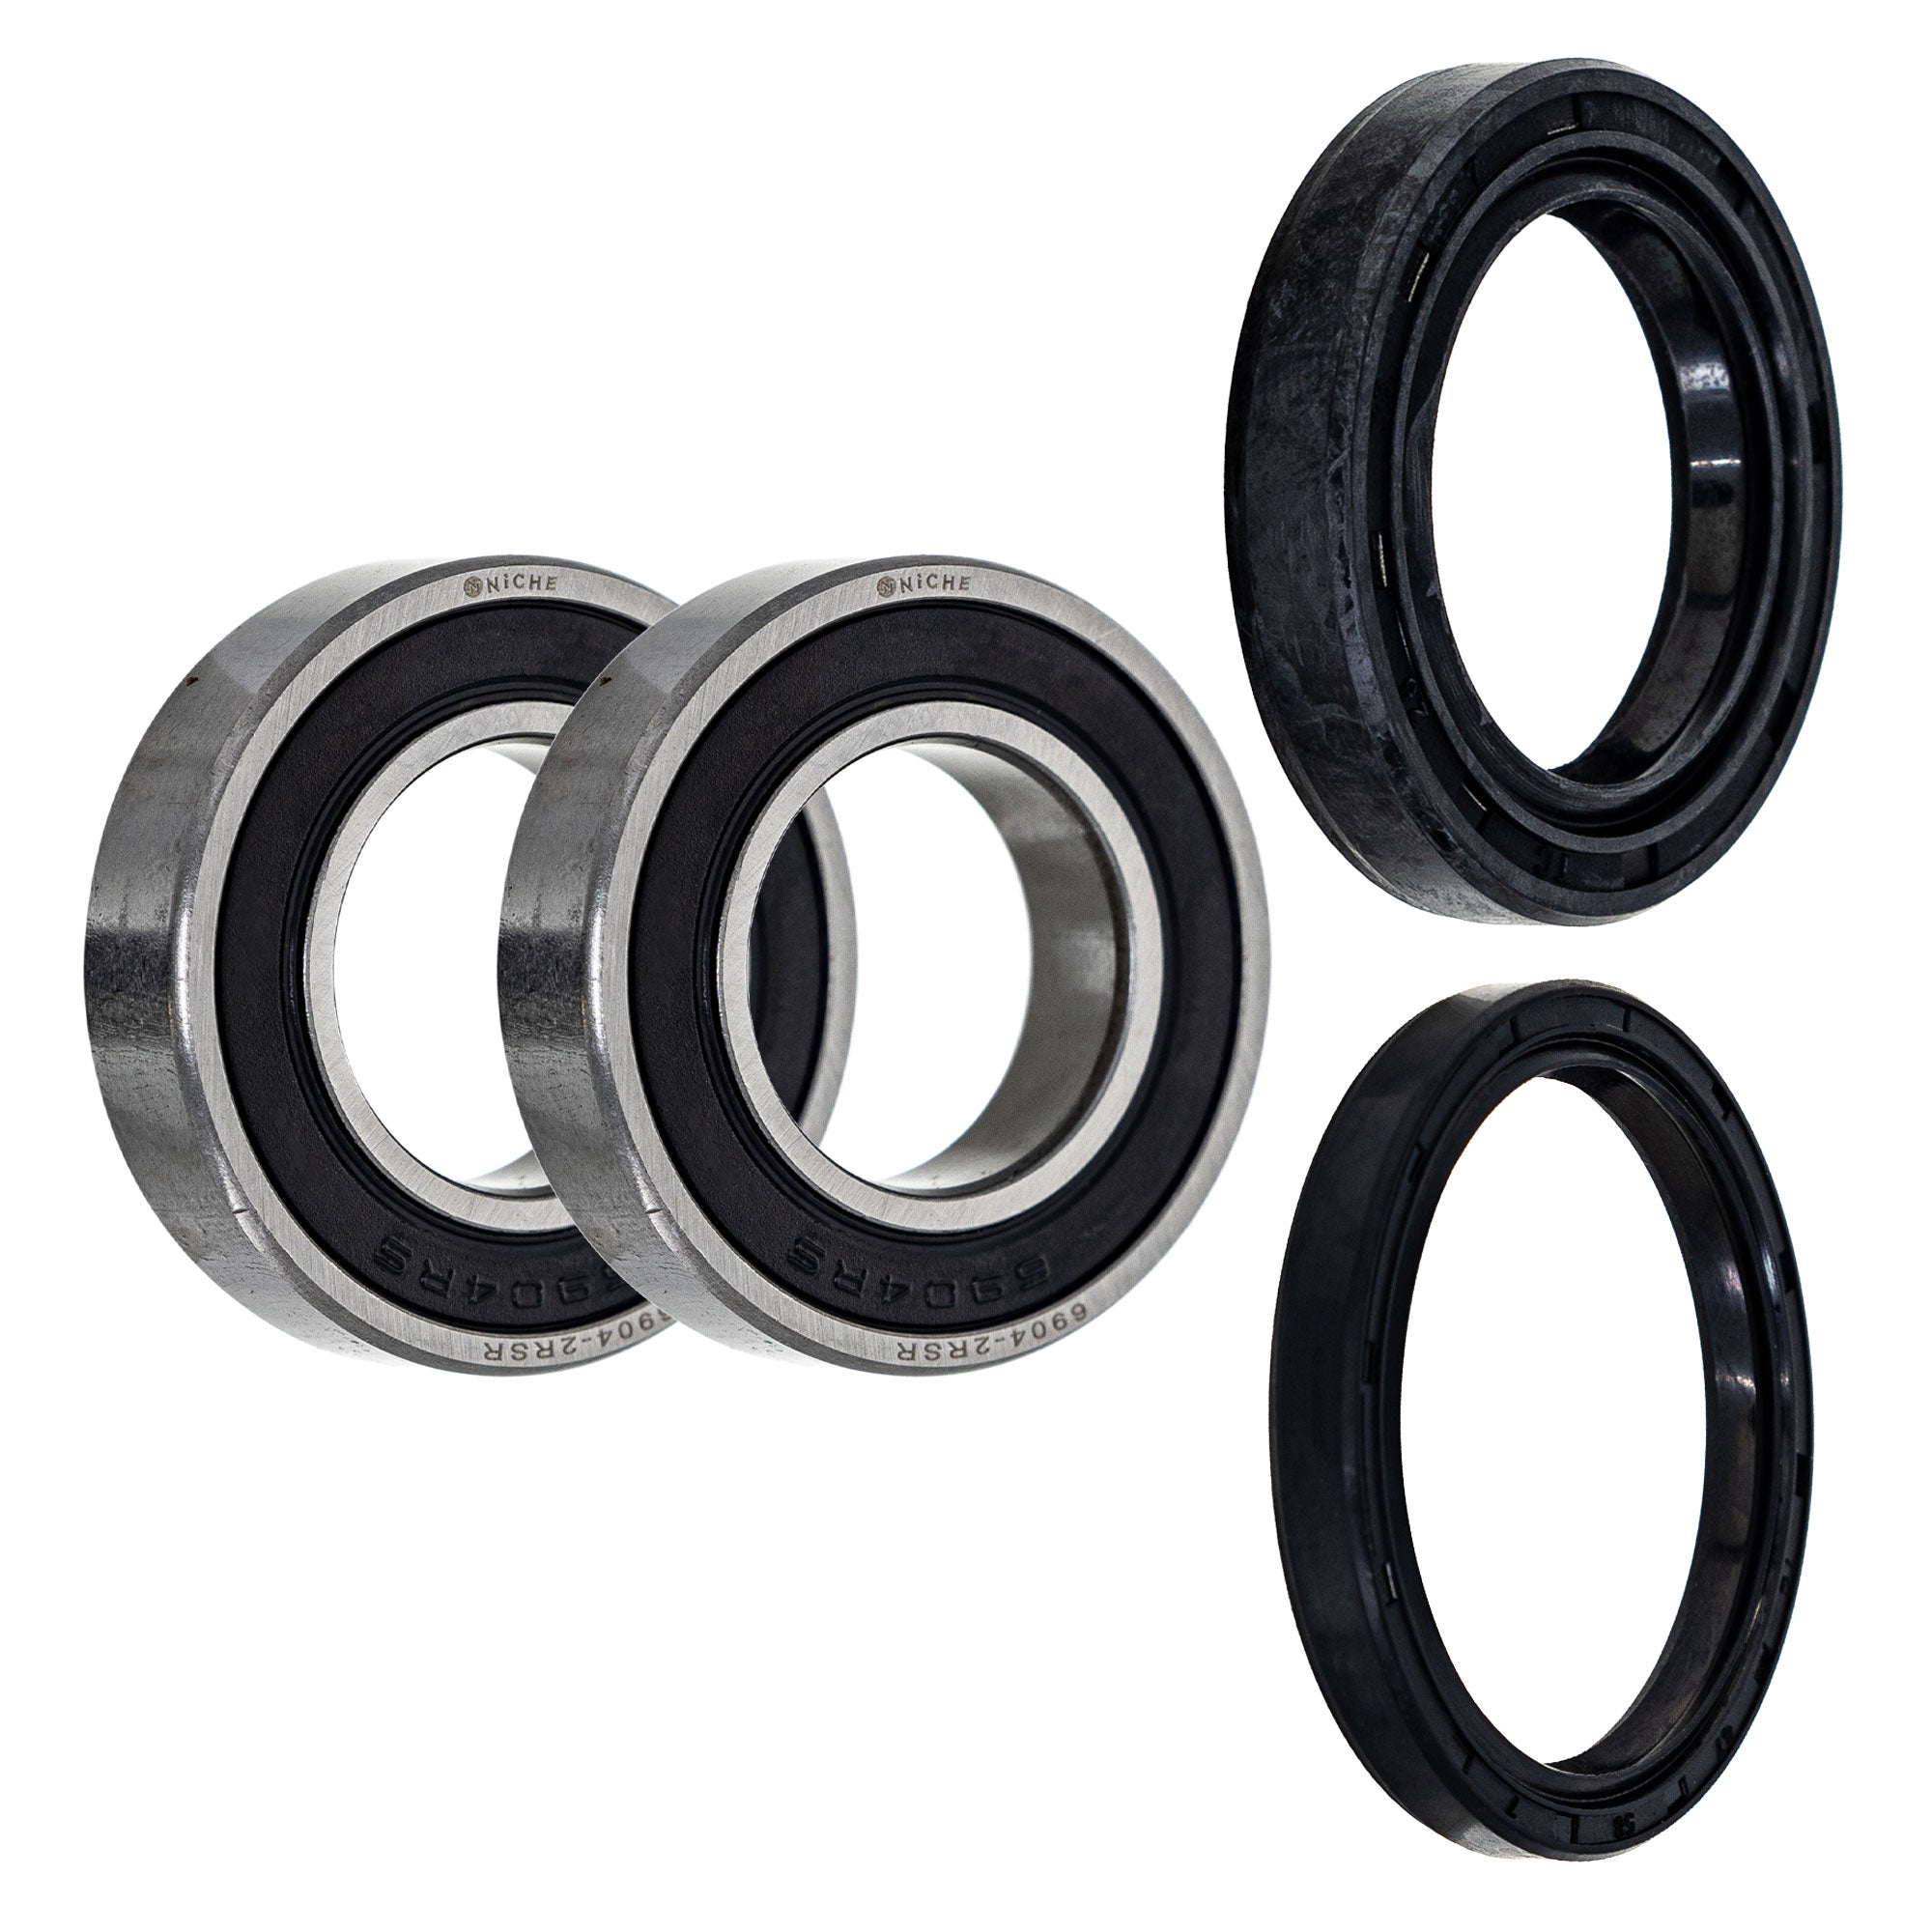 Wheel Bearing Seal Kit for zOTHER WR450F WR426F WR400F WR250F NICHE MK1008965